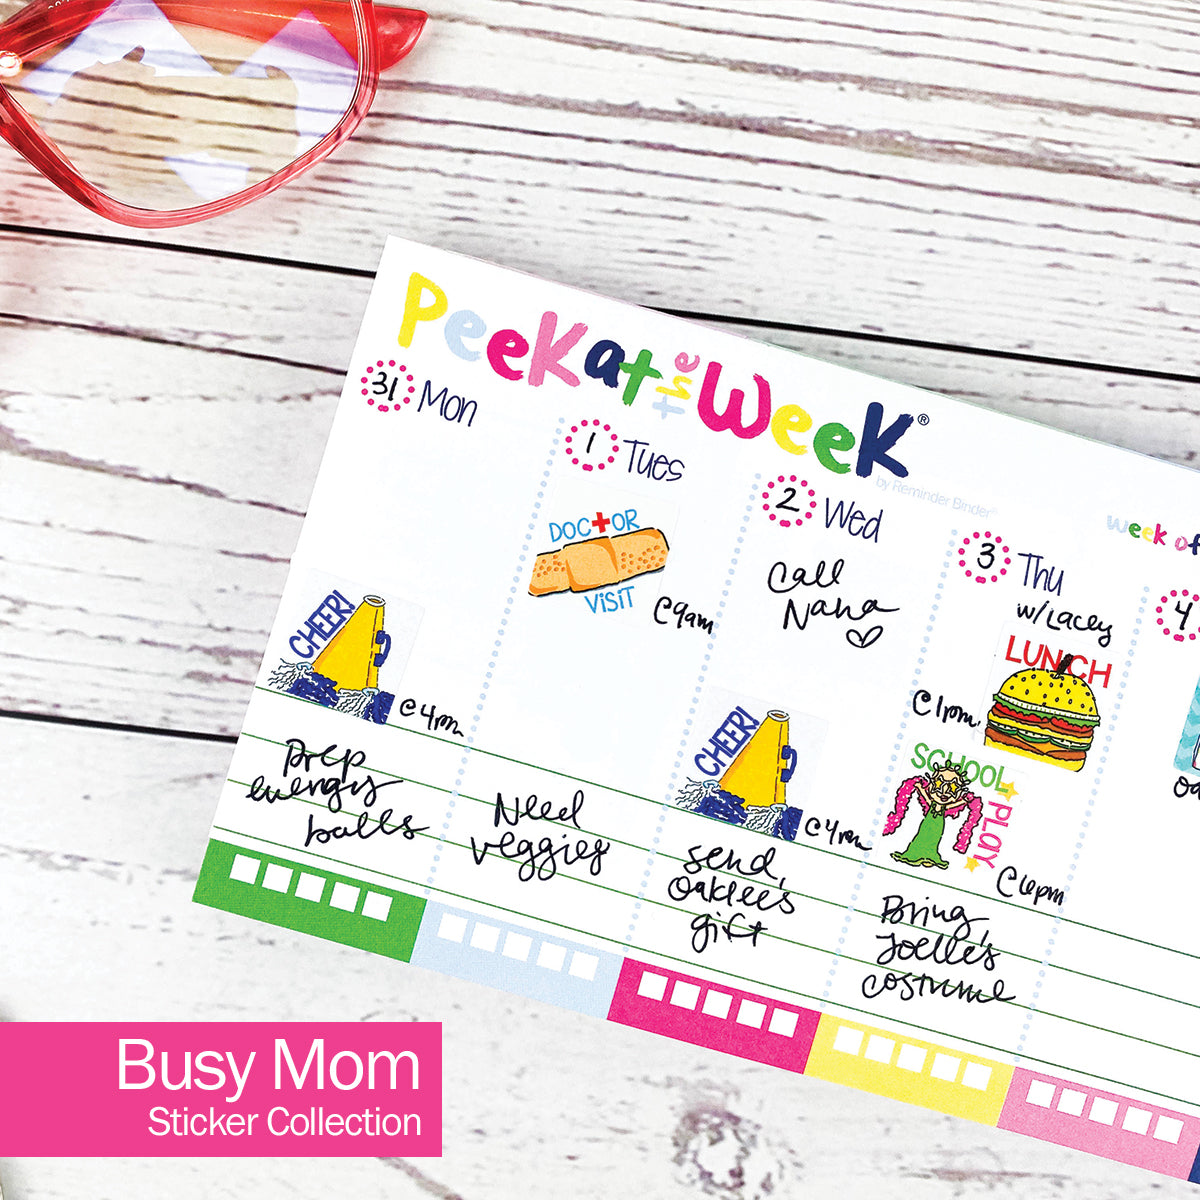 Planner Stickers, Busy Mom Collection (Qty 432) - Birthdays, Home, Work,  Appointments, School Events, Projects, Party, Play Dates, Sports, Family,  Water & Fitness Tracking for Any Planner 